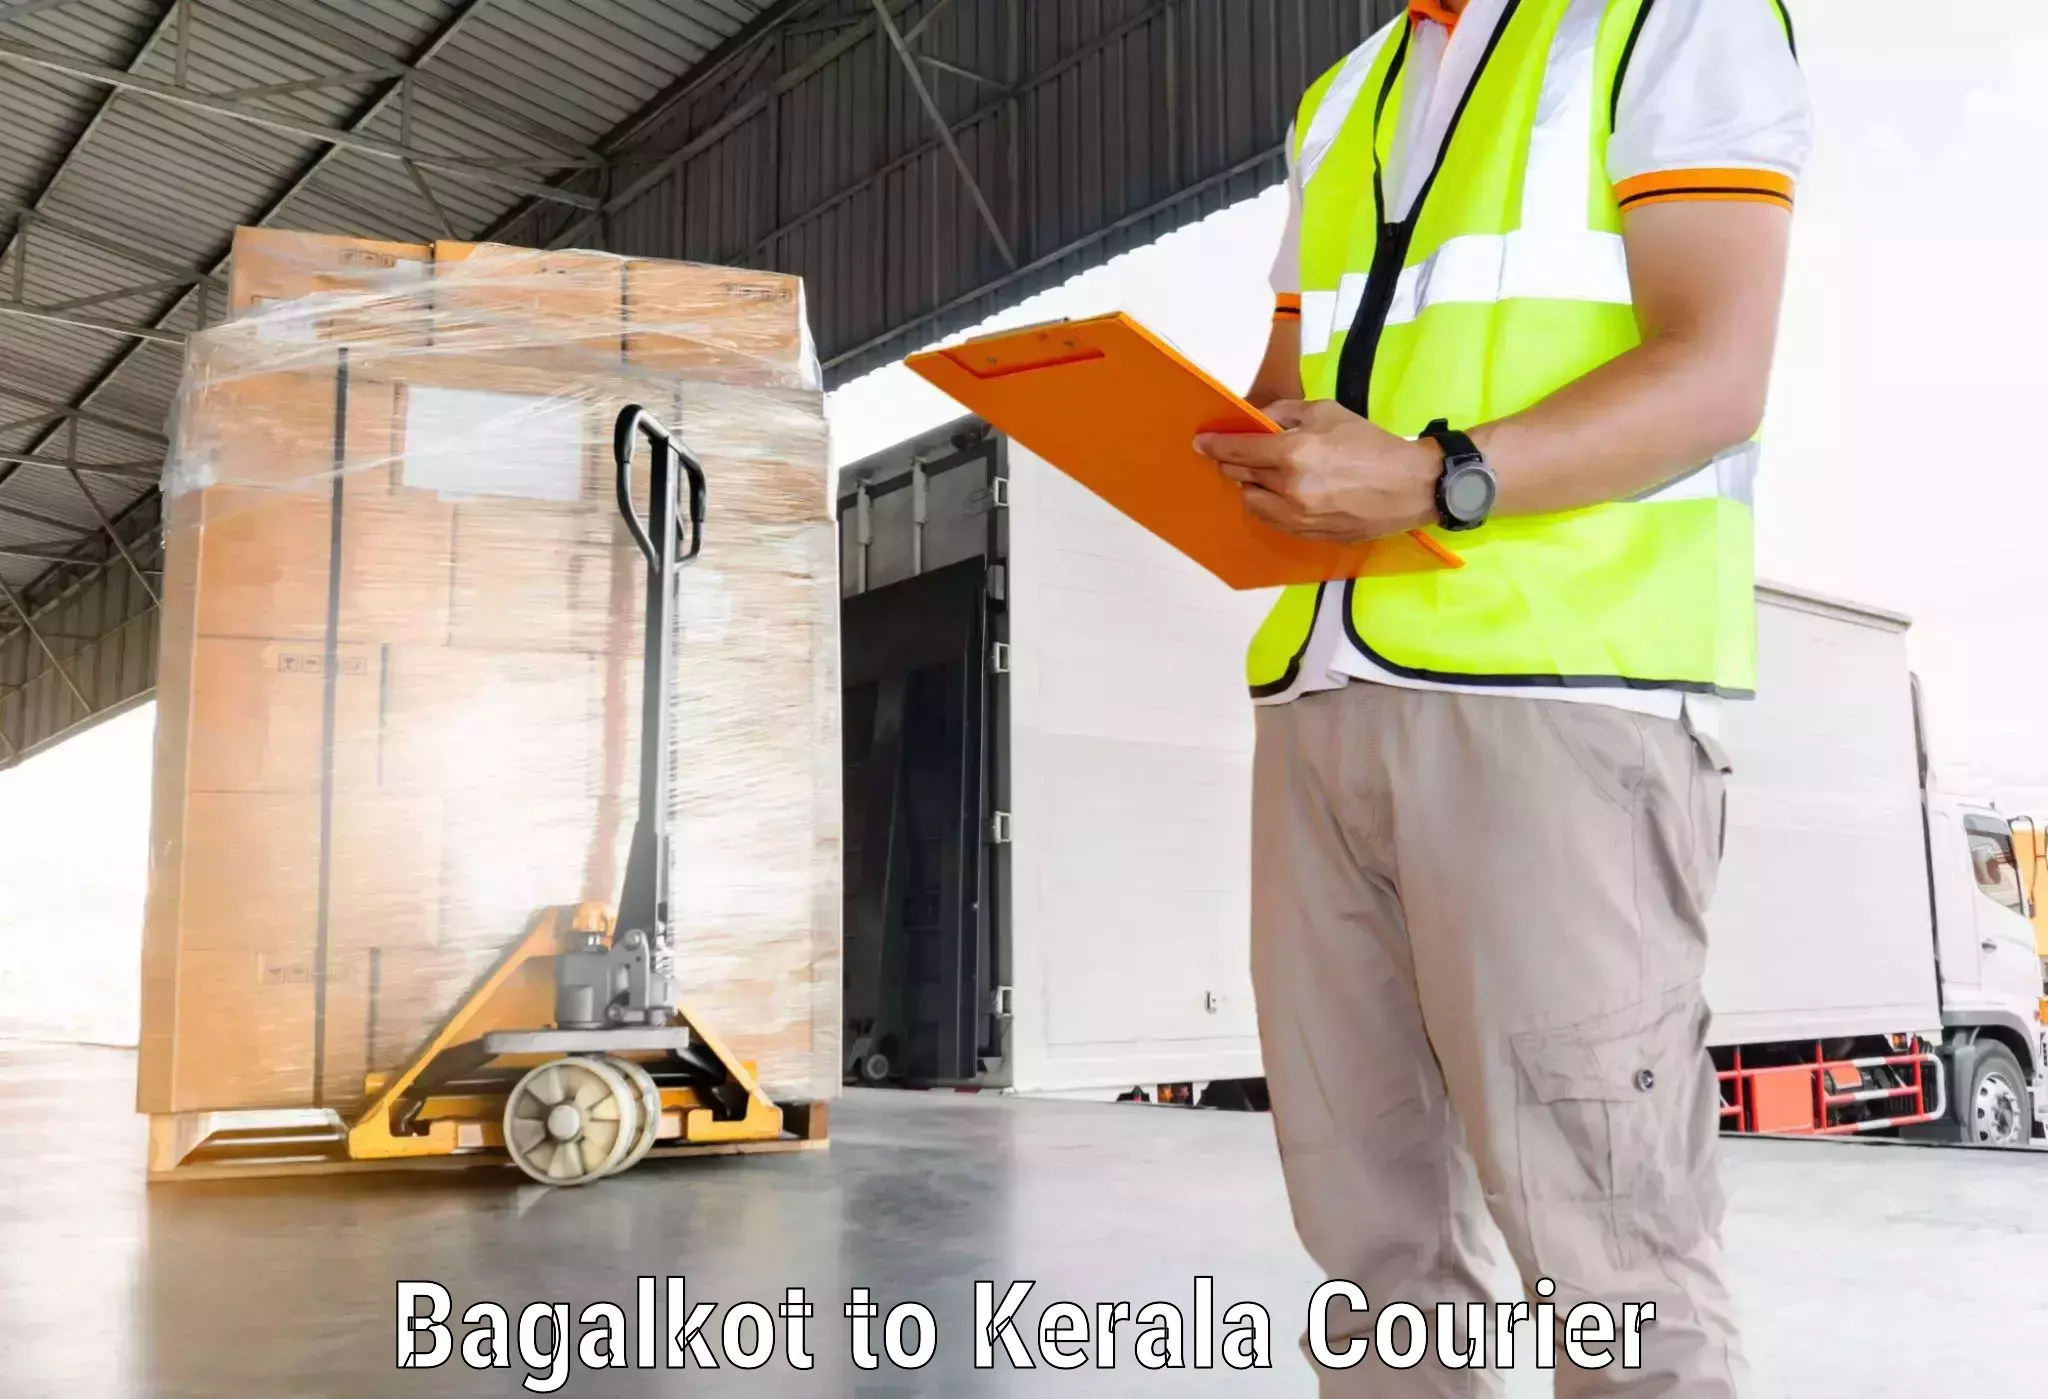 Fast-track shipping solutions Bagalkot to Kochi